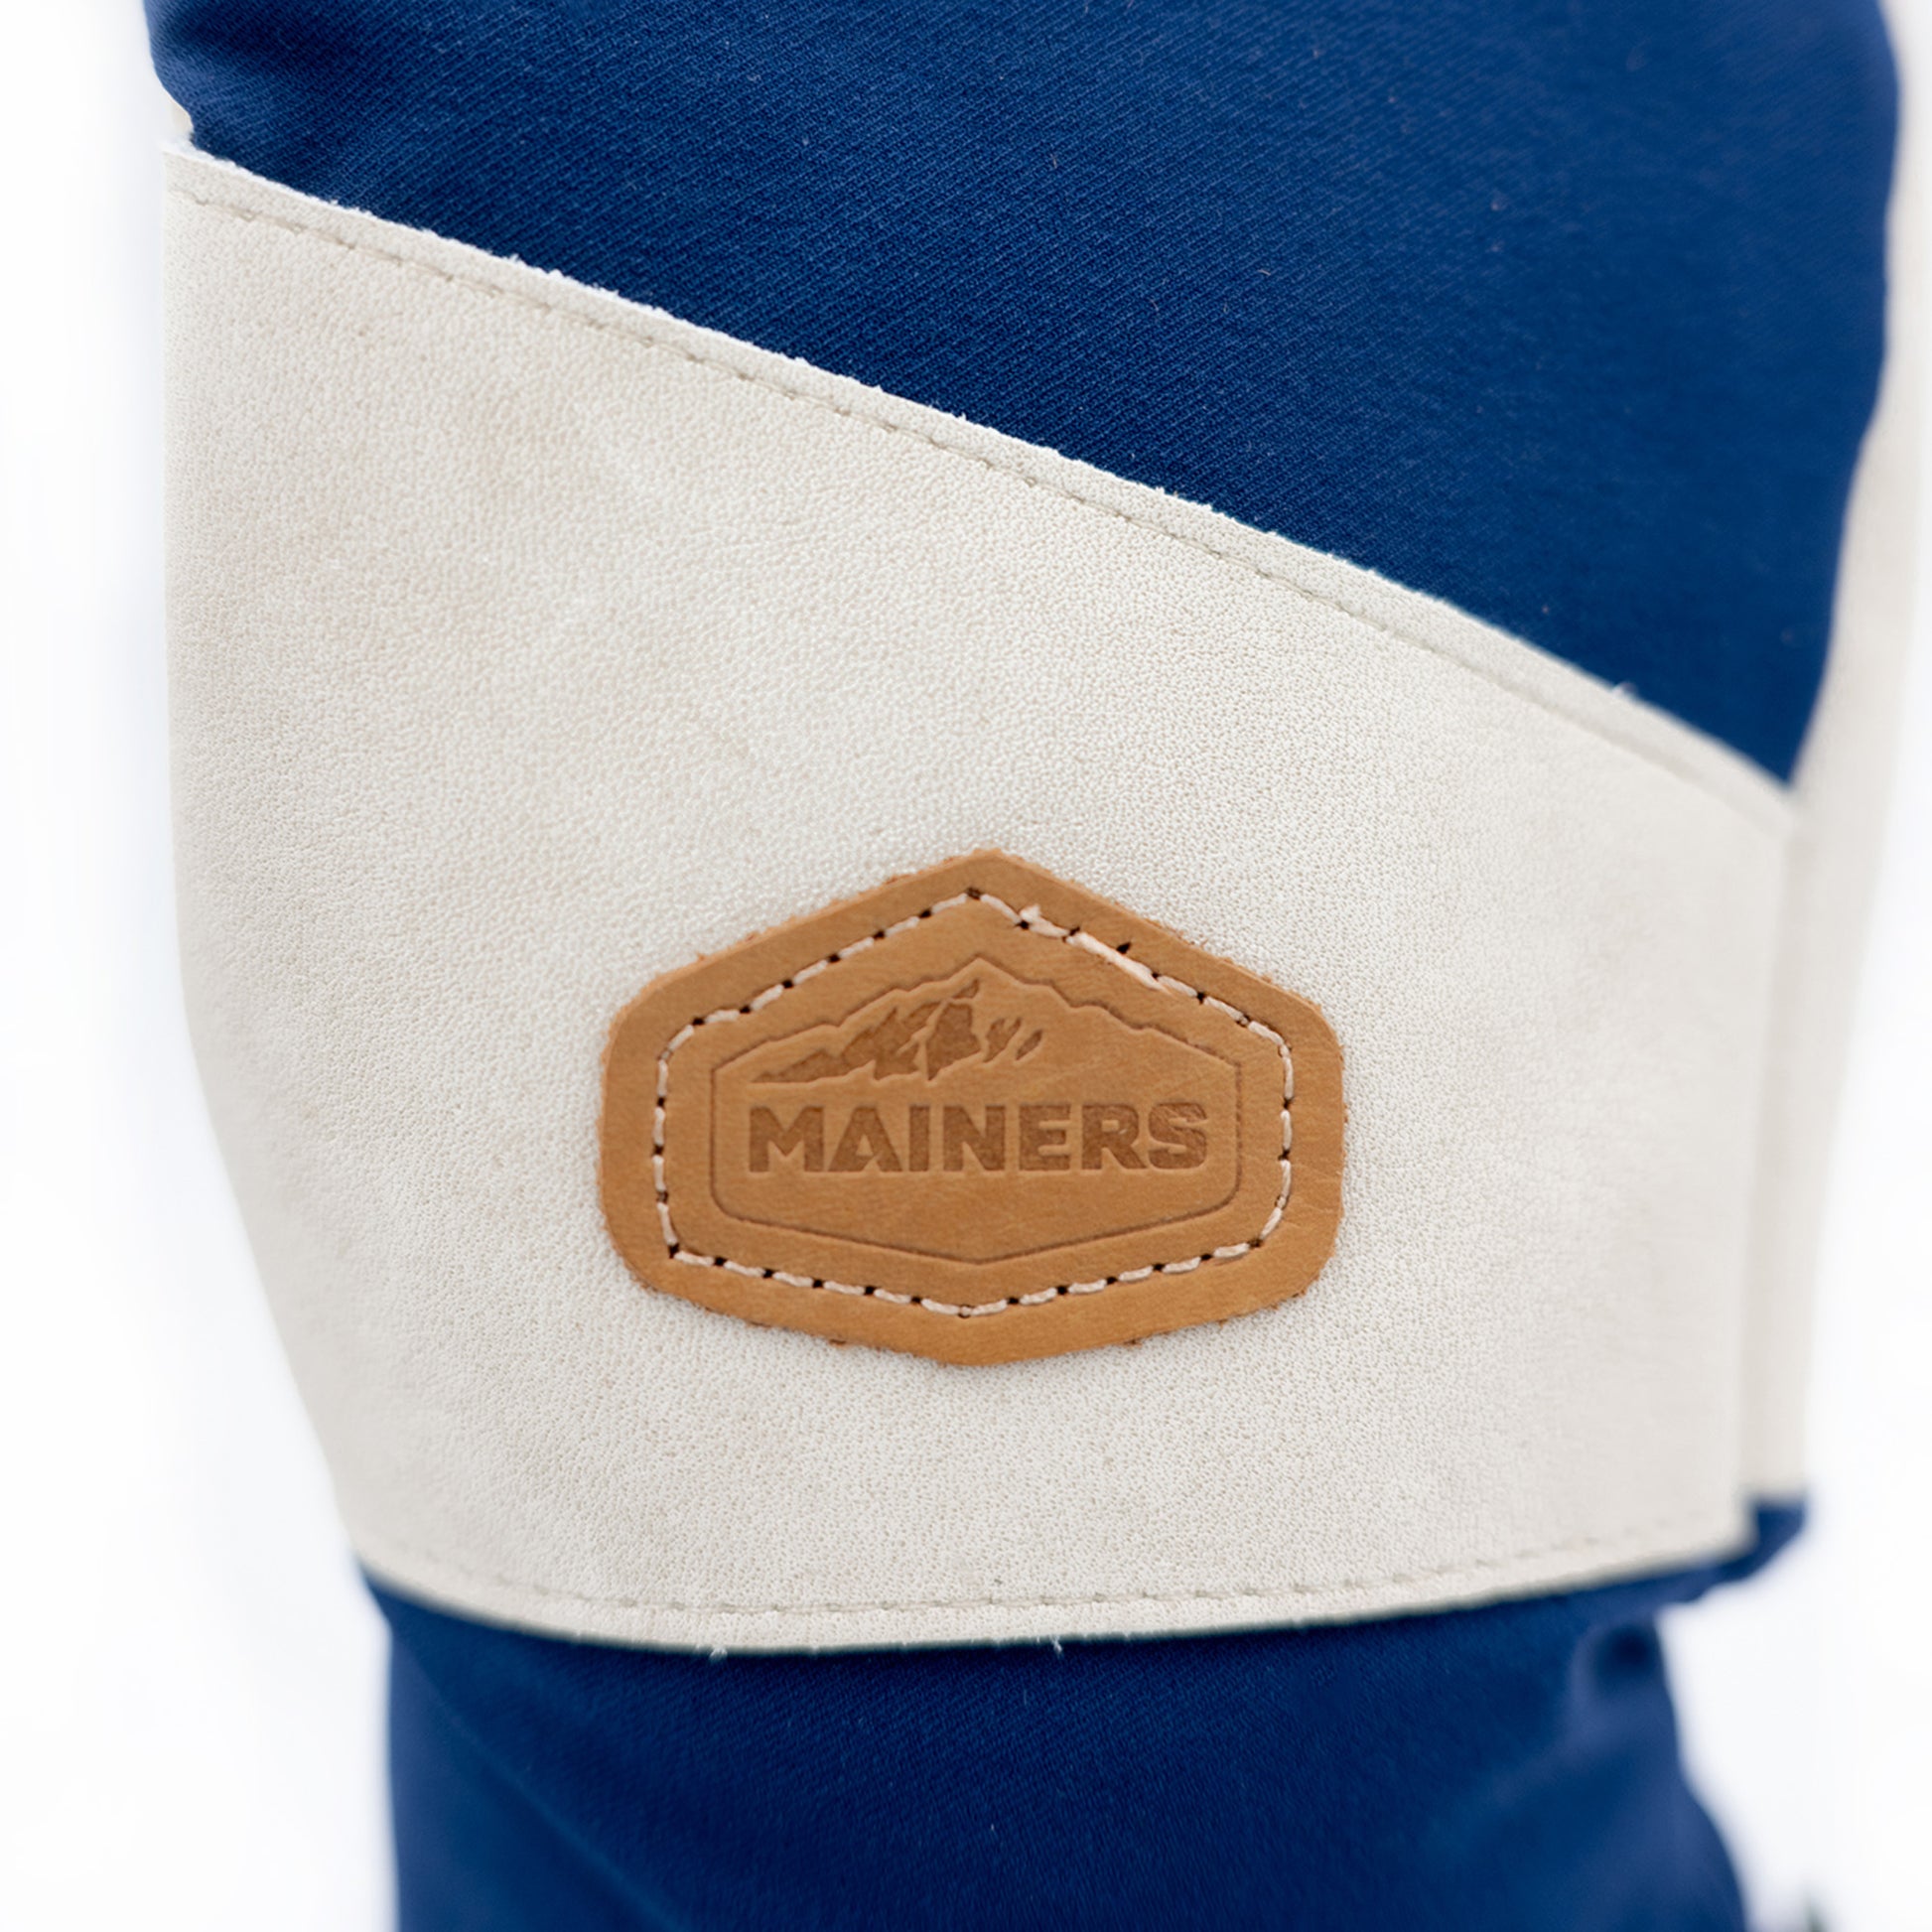 A pair of blue and tan Mainers Mitts featuring the Mainers logo, designed for enhanced resistance and durability.